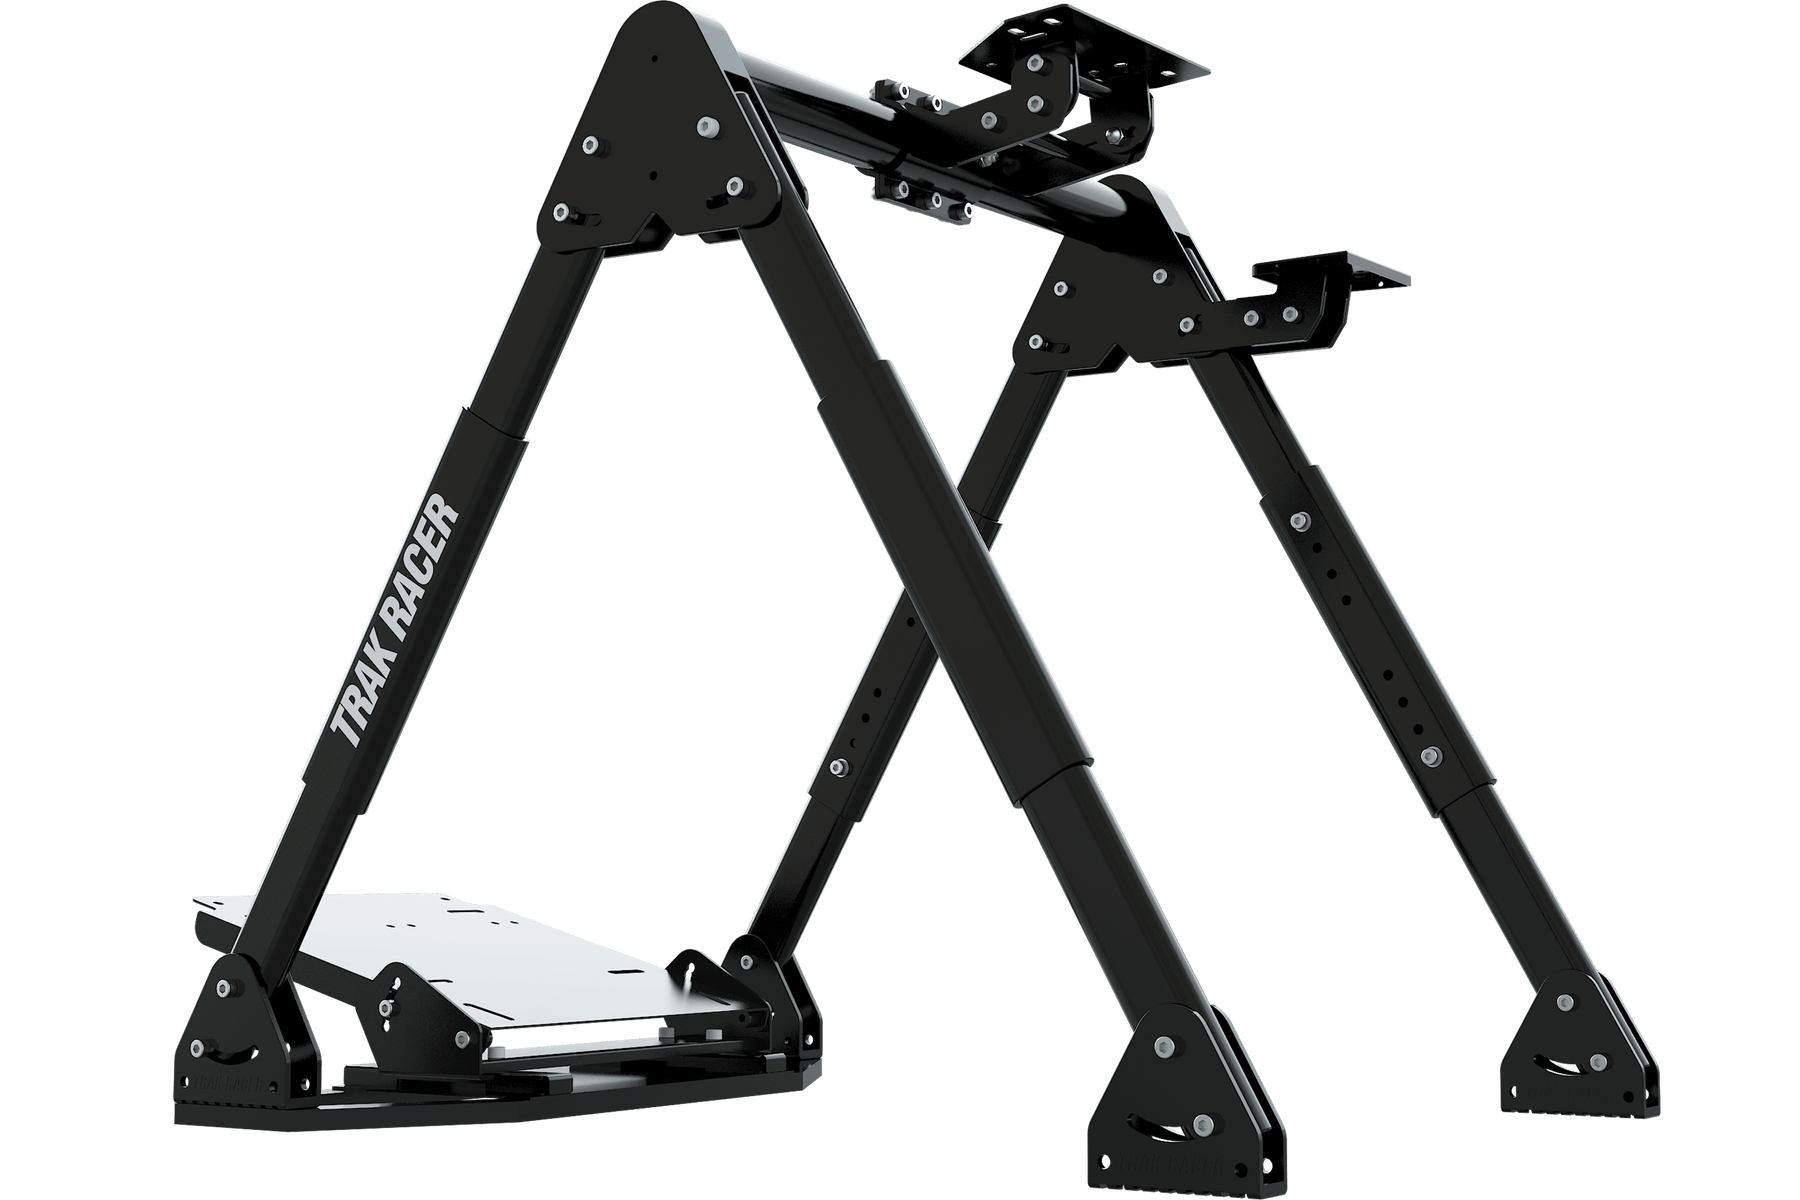 Next Level Racing Wheel Stand 2.0. Steering wheel stand for Thrustmaster,  Fanatec, moza Racing on PC and video game consoles. Upgradeable to full